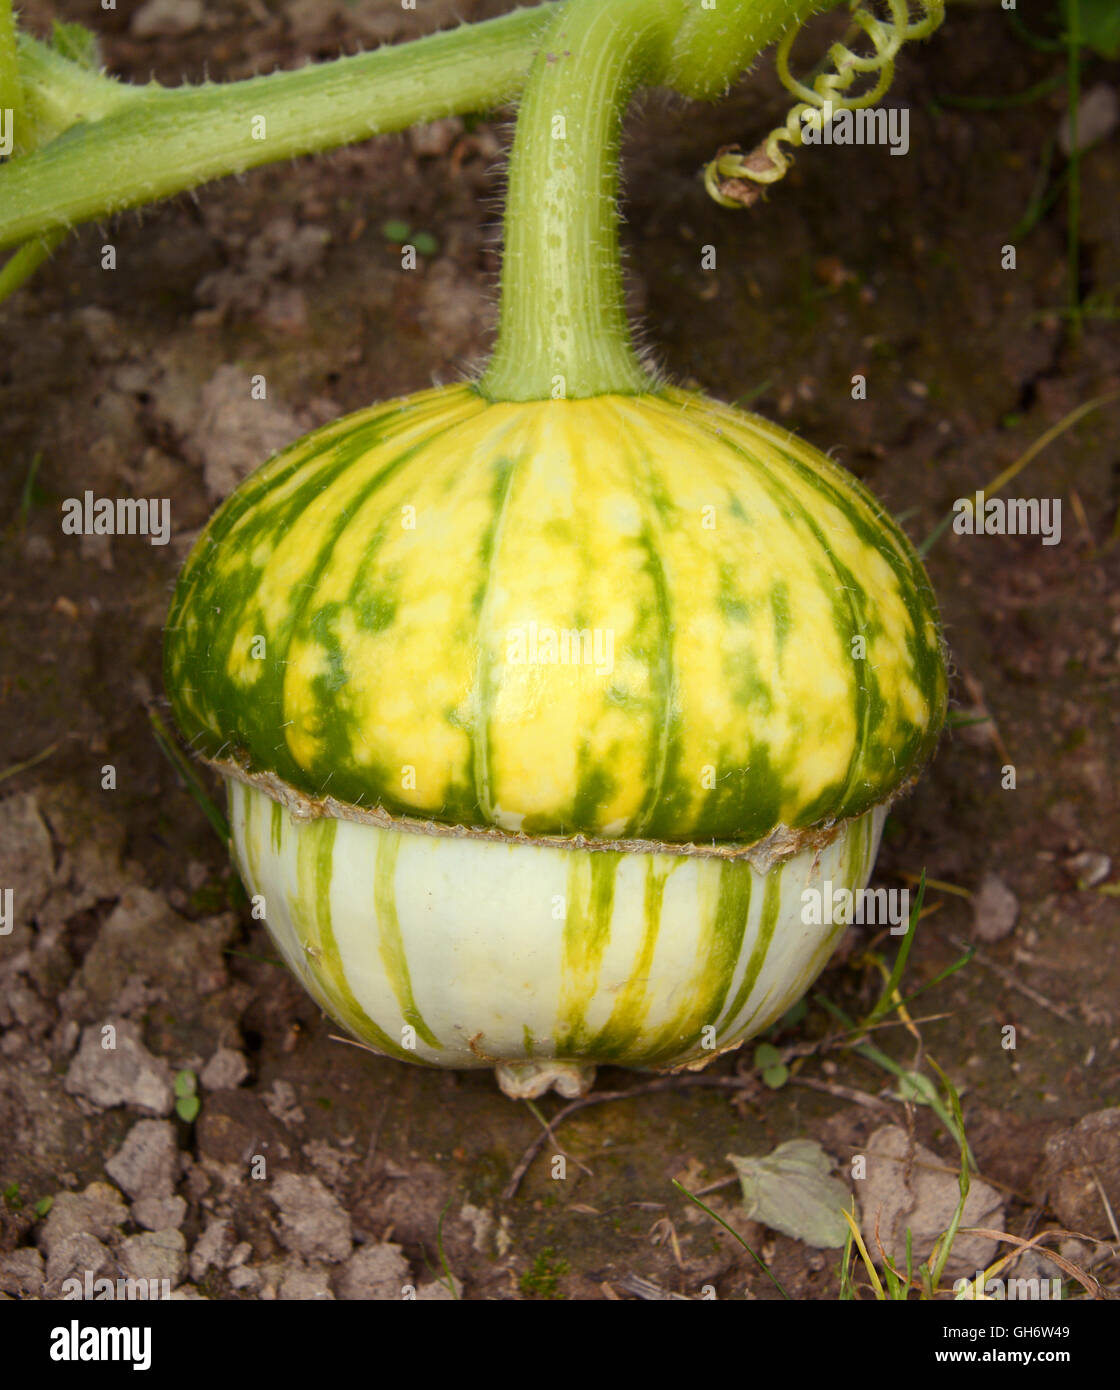 Turks turban squash developing on the vine, growing along the ground Stock Photo